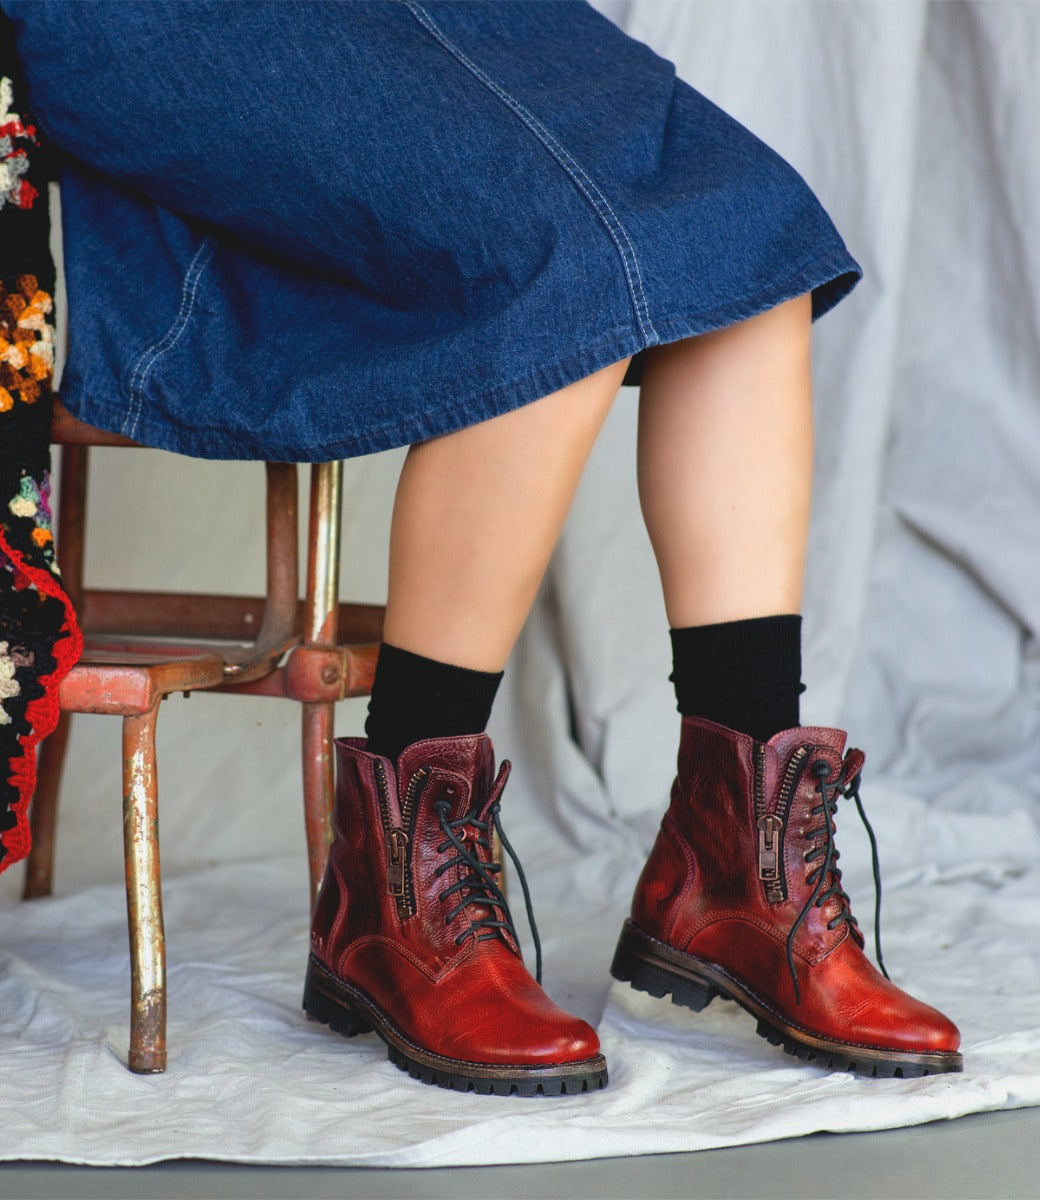 A woman is sitting on a chair wearing Bed Stu red boots.